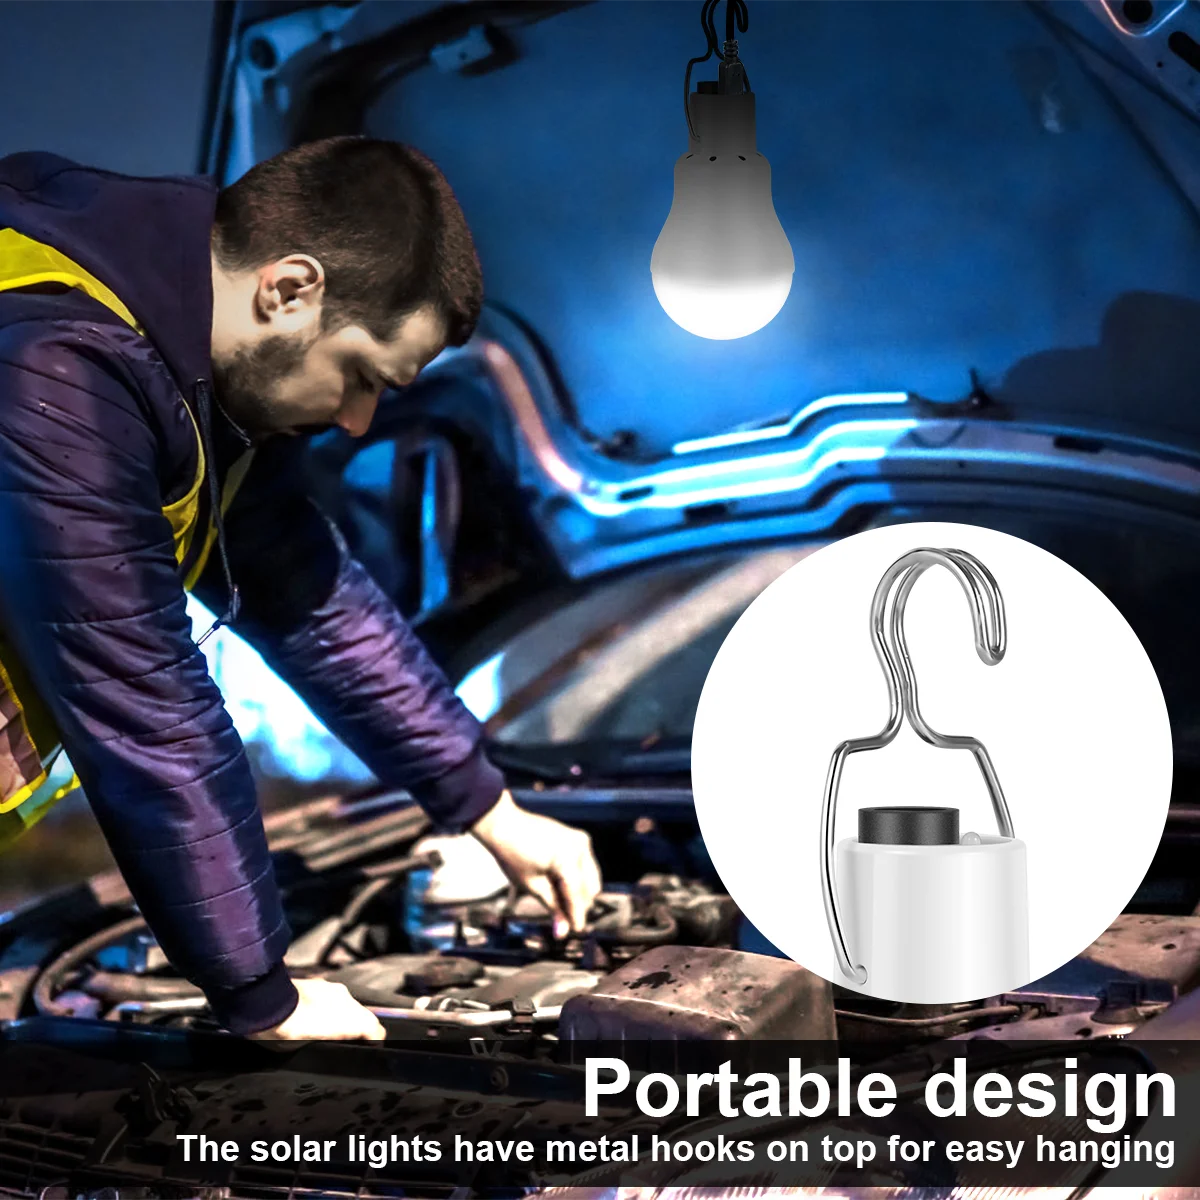 Portable solar lights feature metal hooks for easy hanging or top placement.